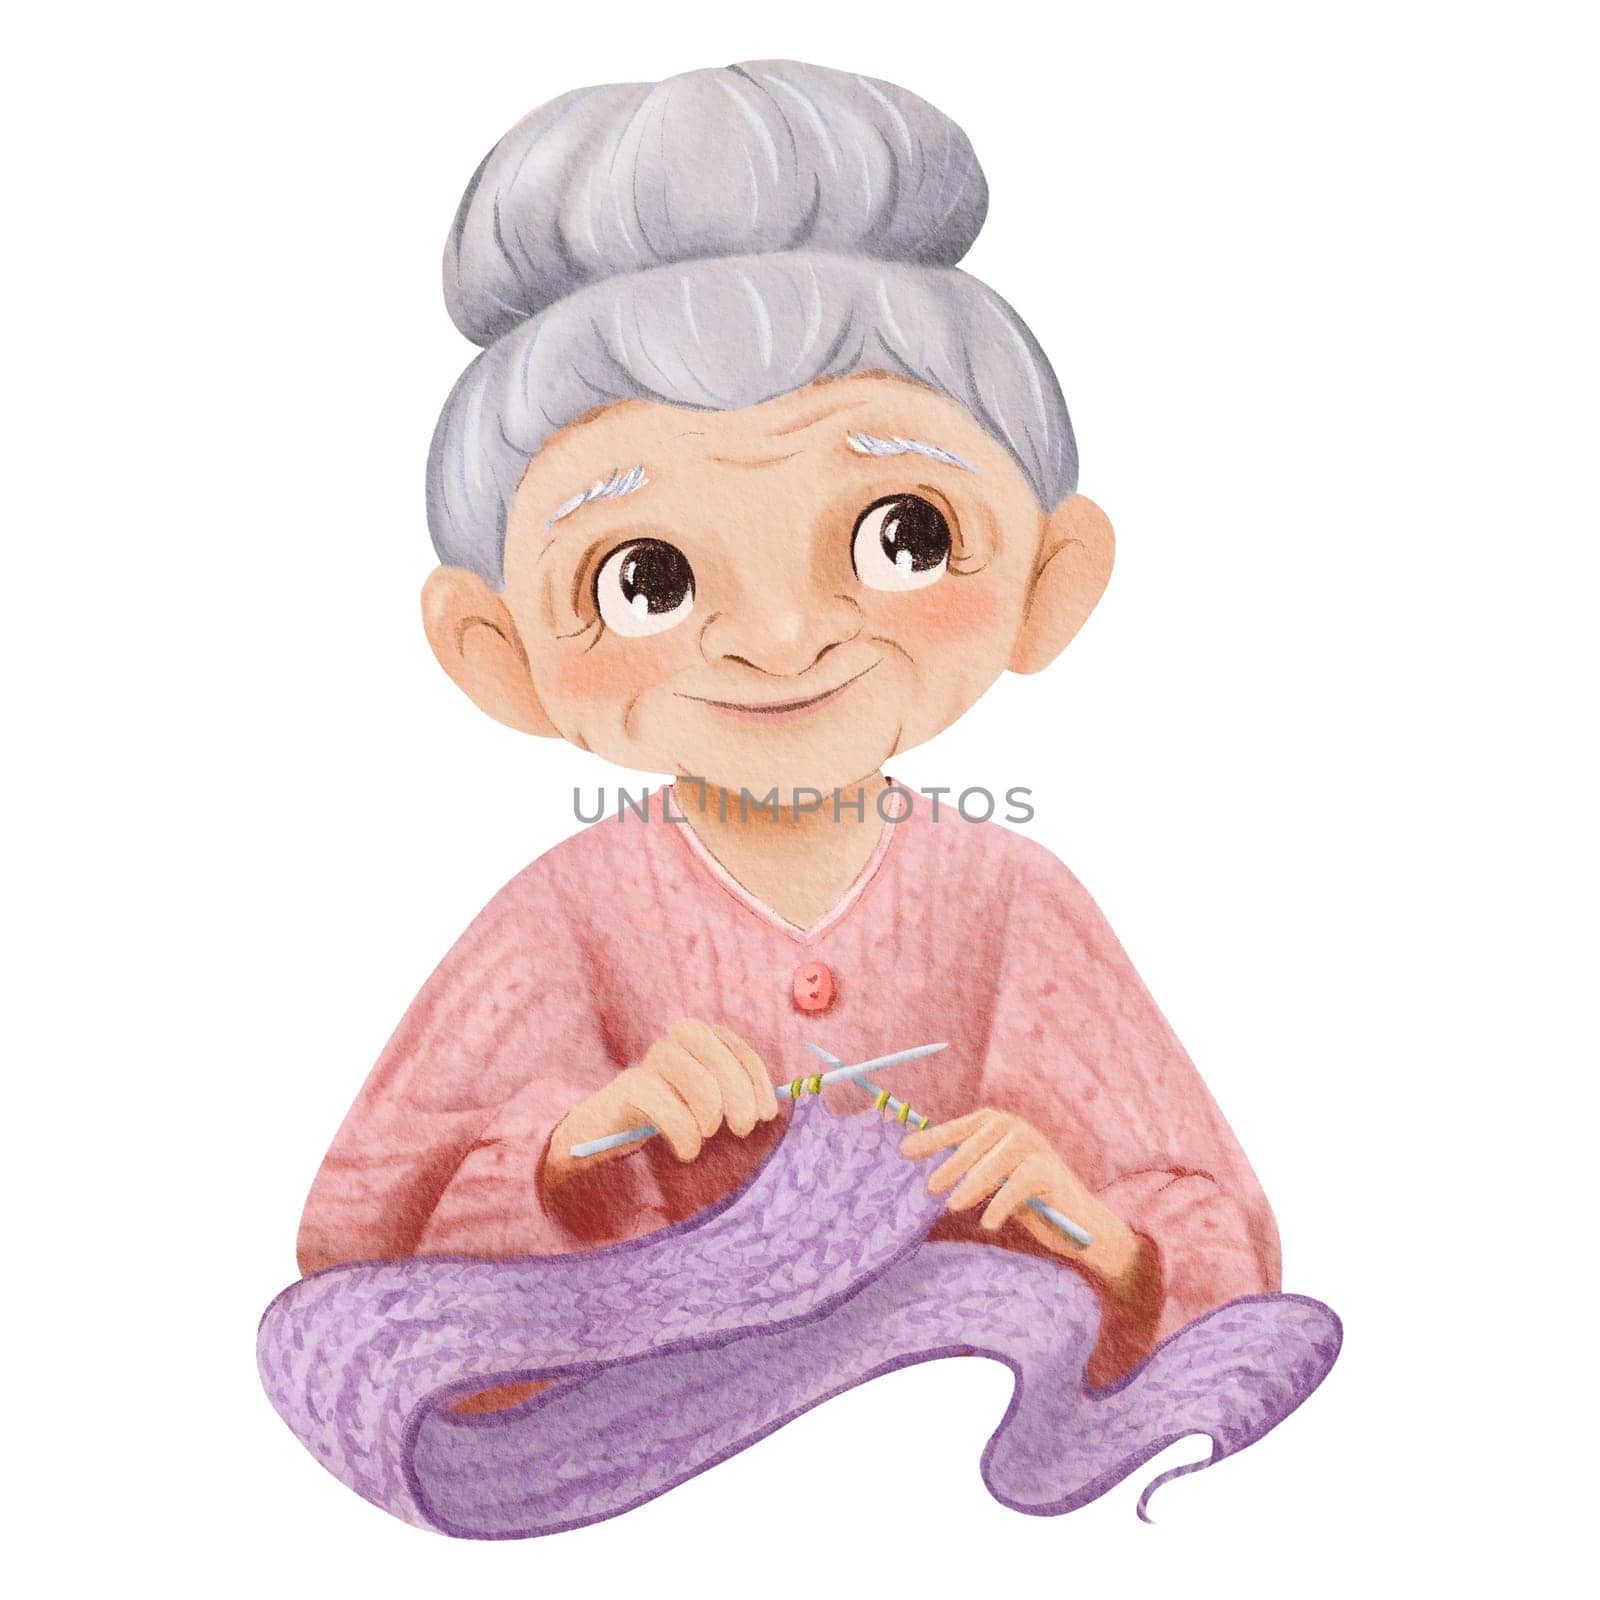 A watercolor children's illustration. a gray-haired grandmother knitting a scarf. hair in a bun and wears a pink sweater. a smiling woman engaged in knitting, for education or family-themed designs.